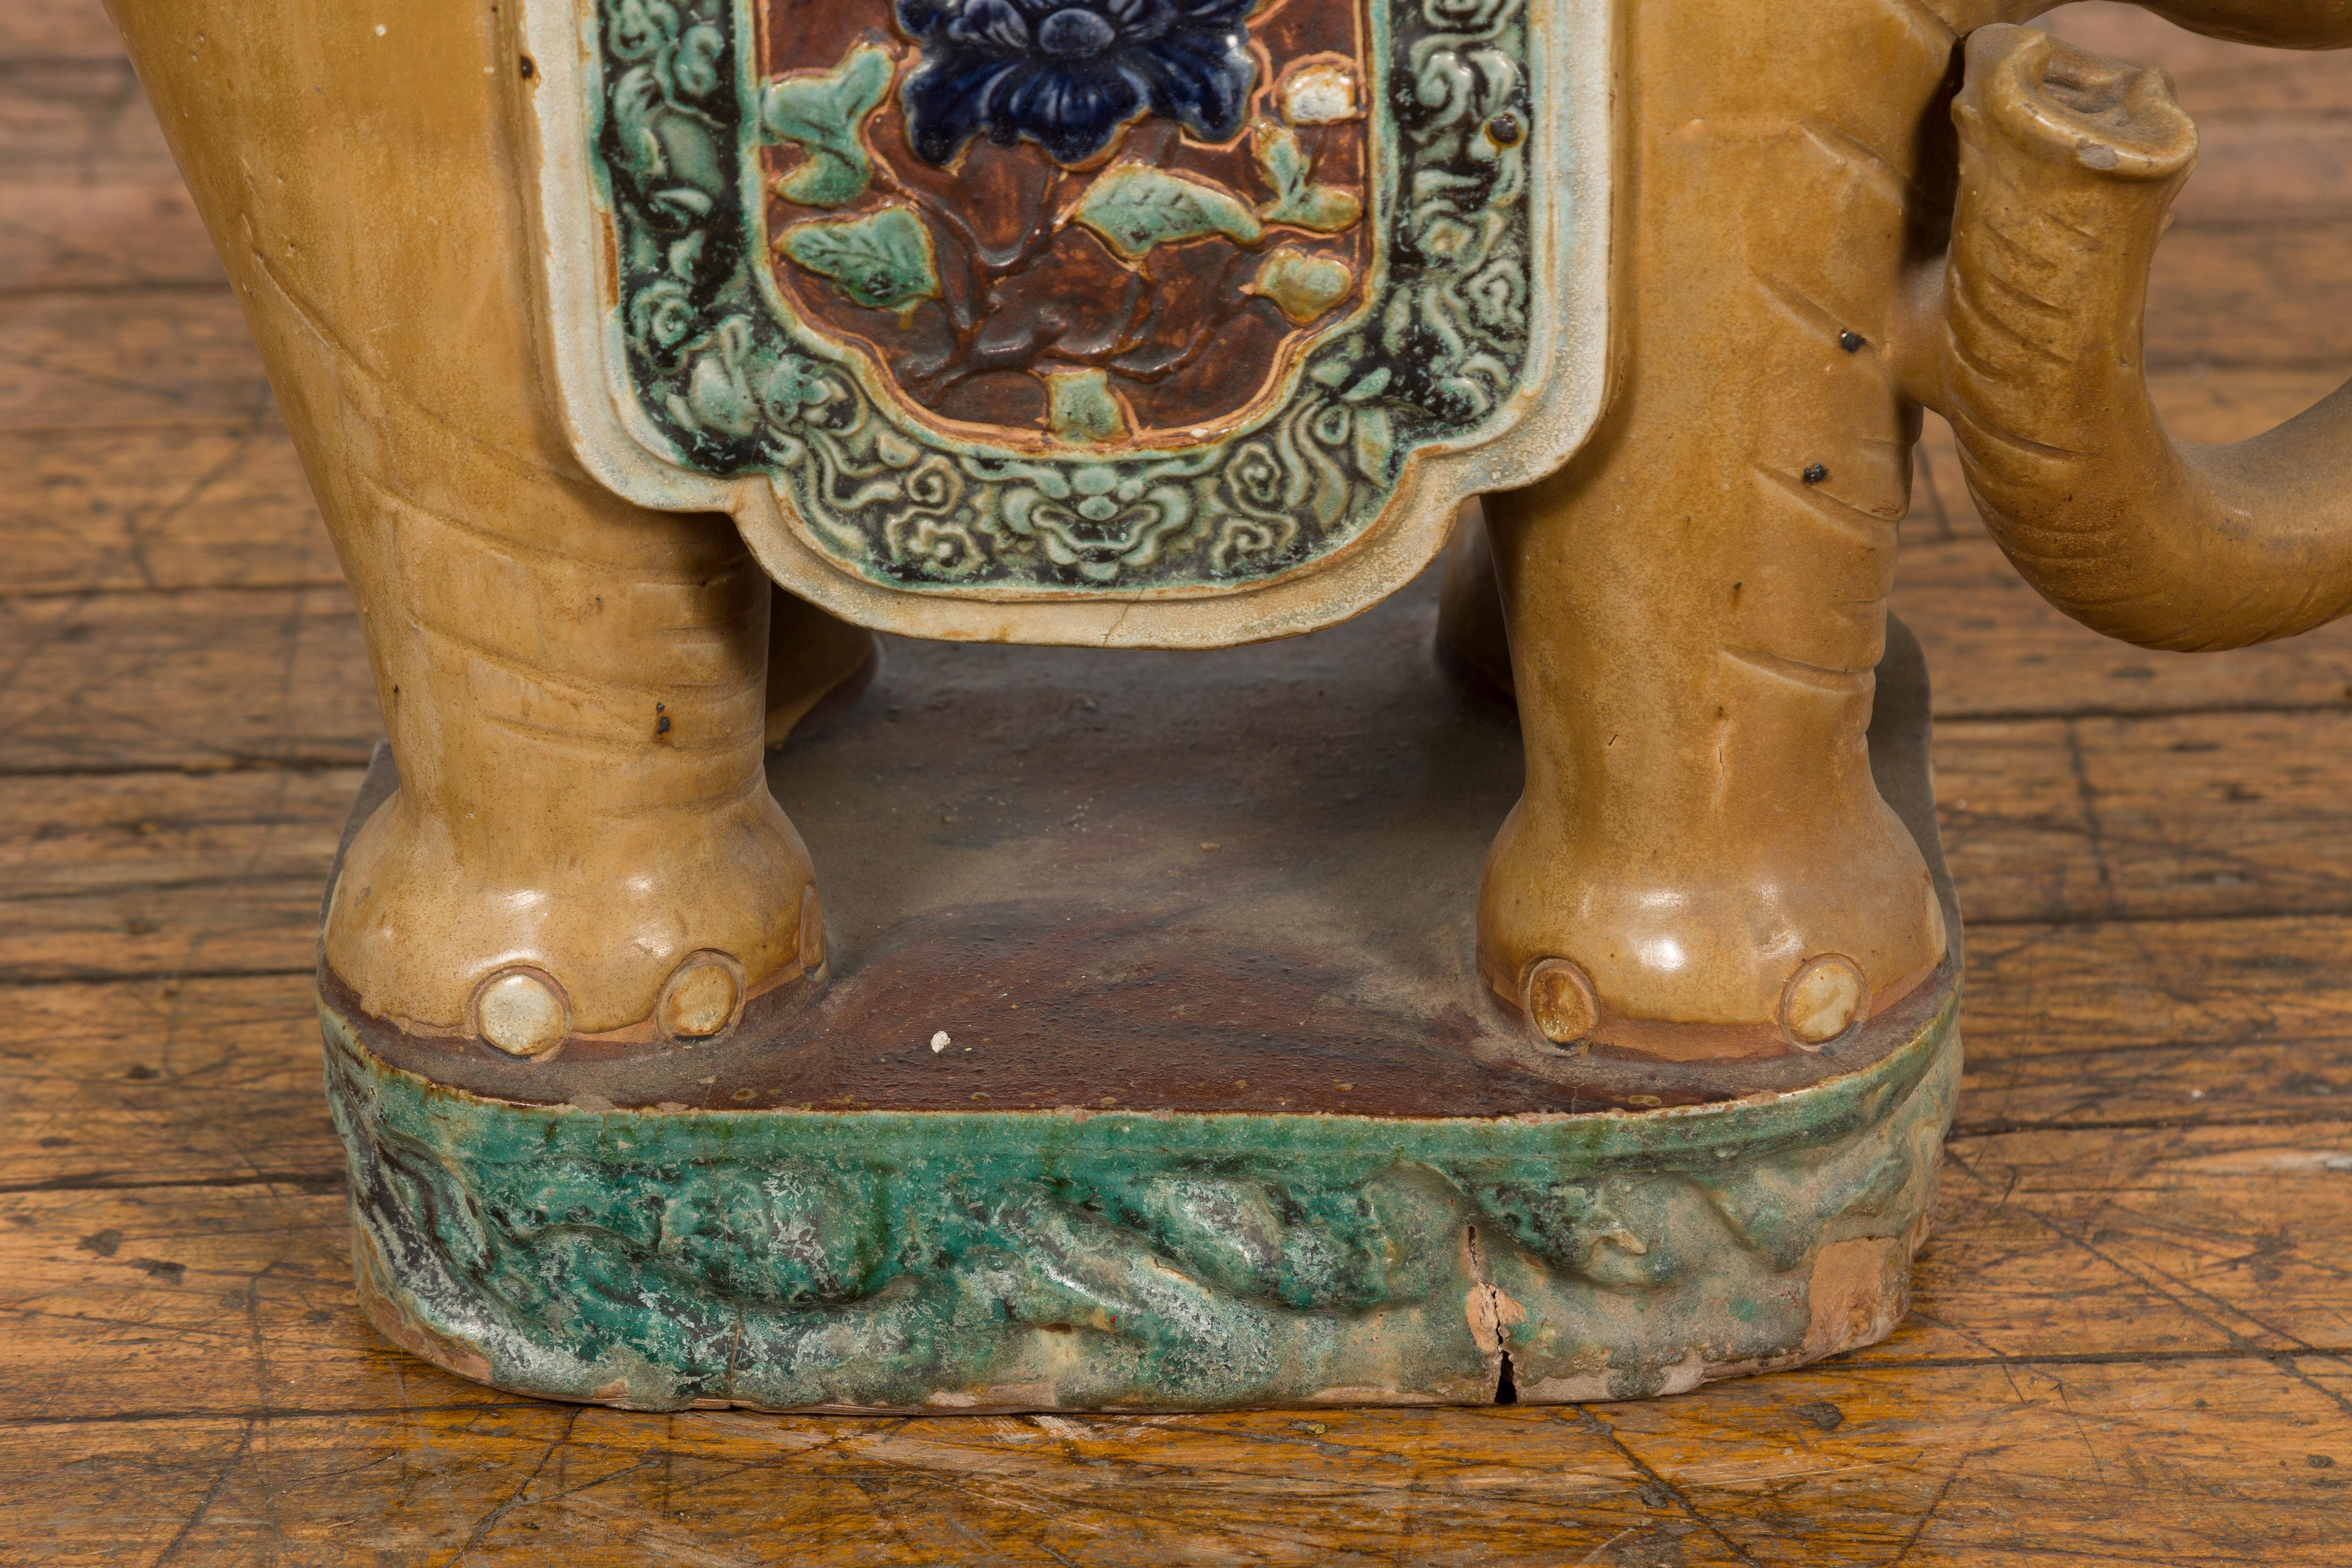 Antique Hand-Painted Annamese Ceramic Garden Stool from Vietnam, circa 1900 For Sale 9